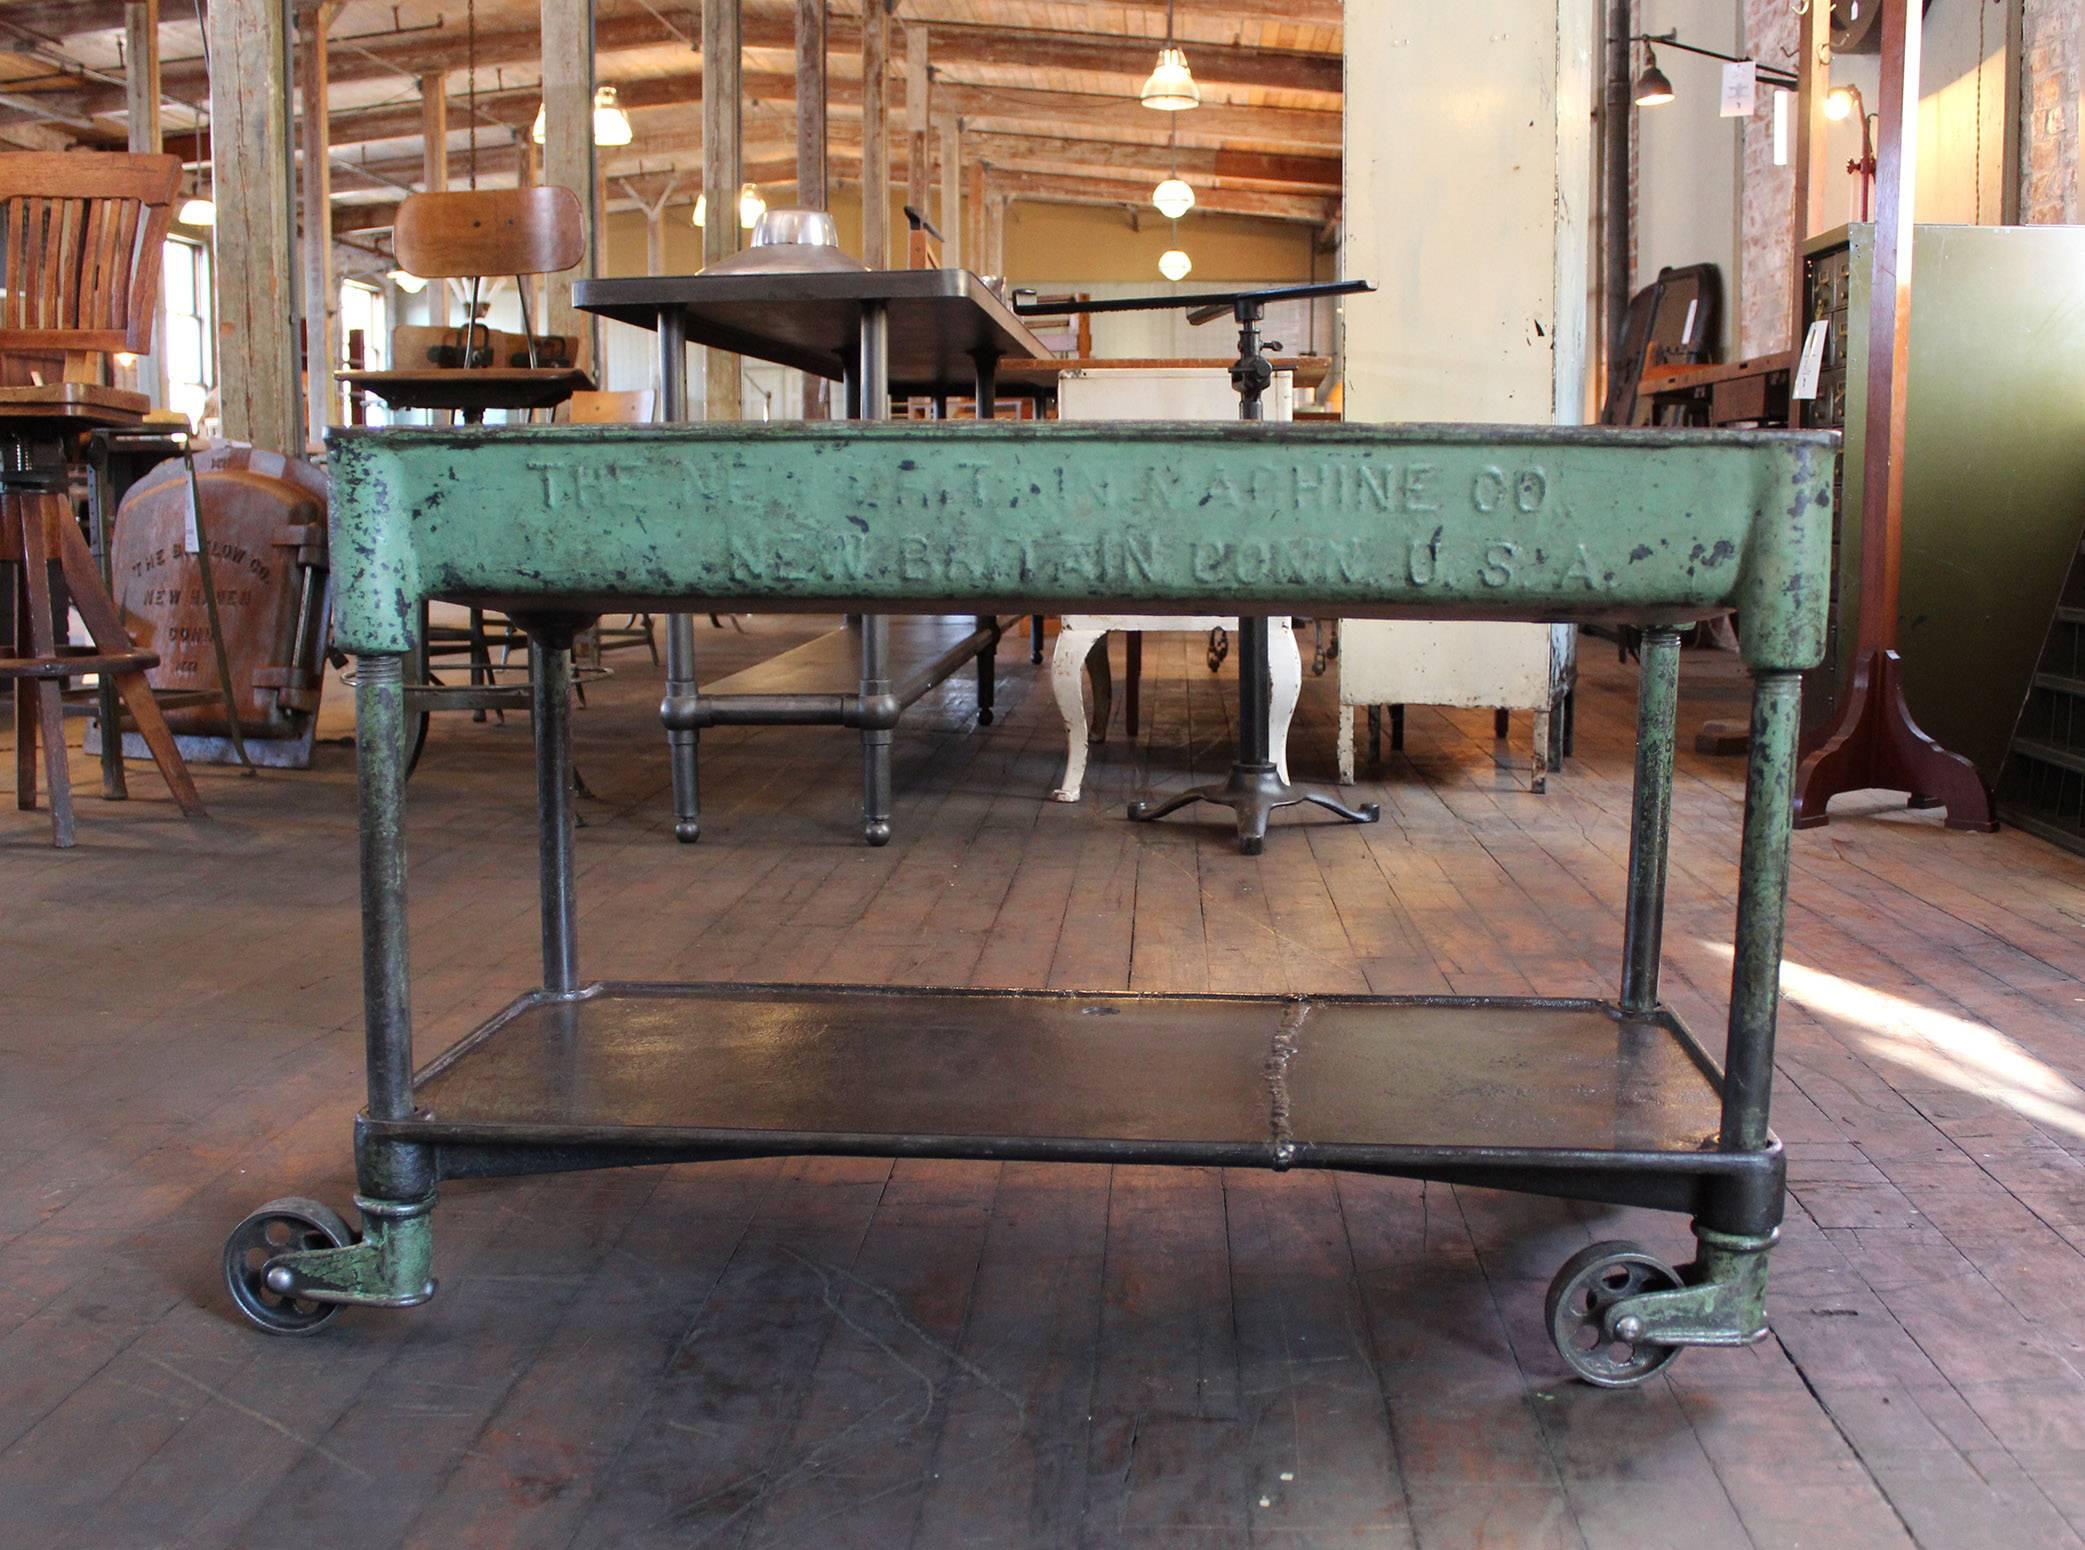 Incredible vintage Industrial cast iron machine rolling bar cart on four swivel castors. An exceptional piece. Measures: 36" x 16 1/2" 23 1/4" in height. Shelf measures: 6 1/4" from floor.